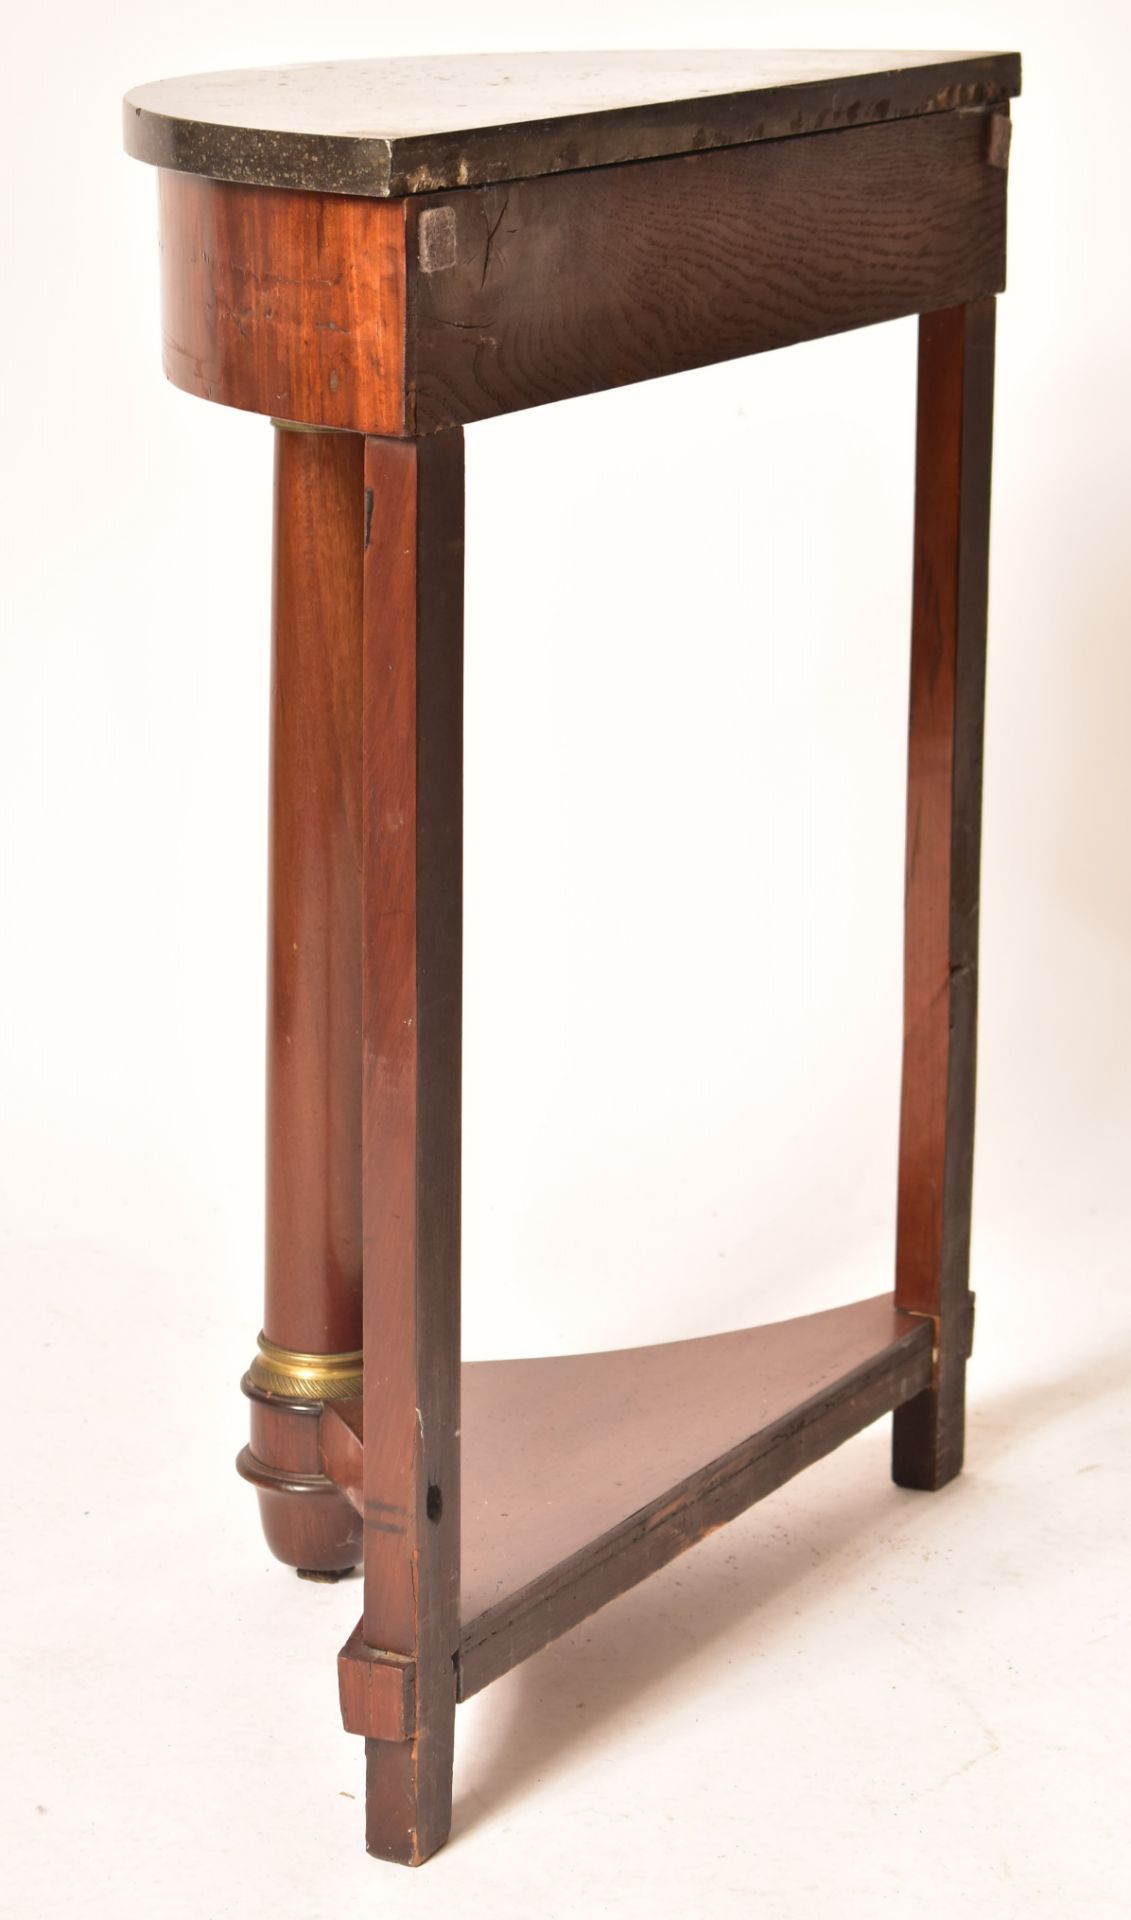 PAIR OF BIEDERMEIER WALNUT & MARBLE CONSOLE HALL TABLES - Image 6 of 9